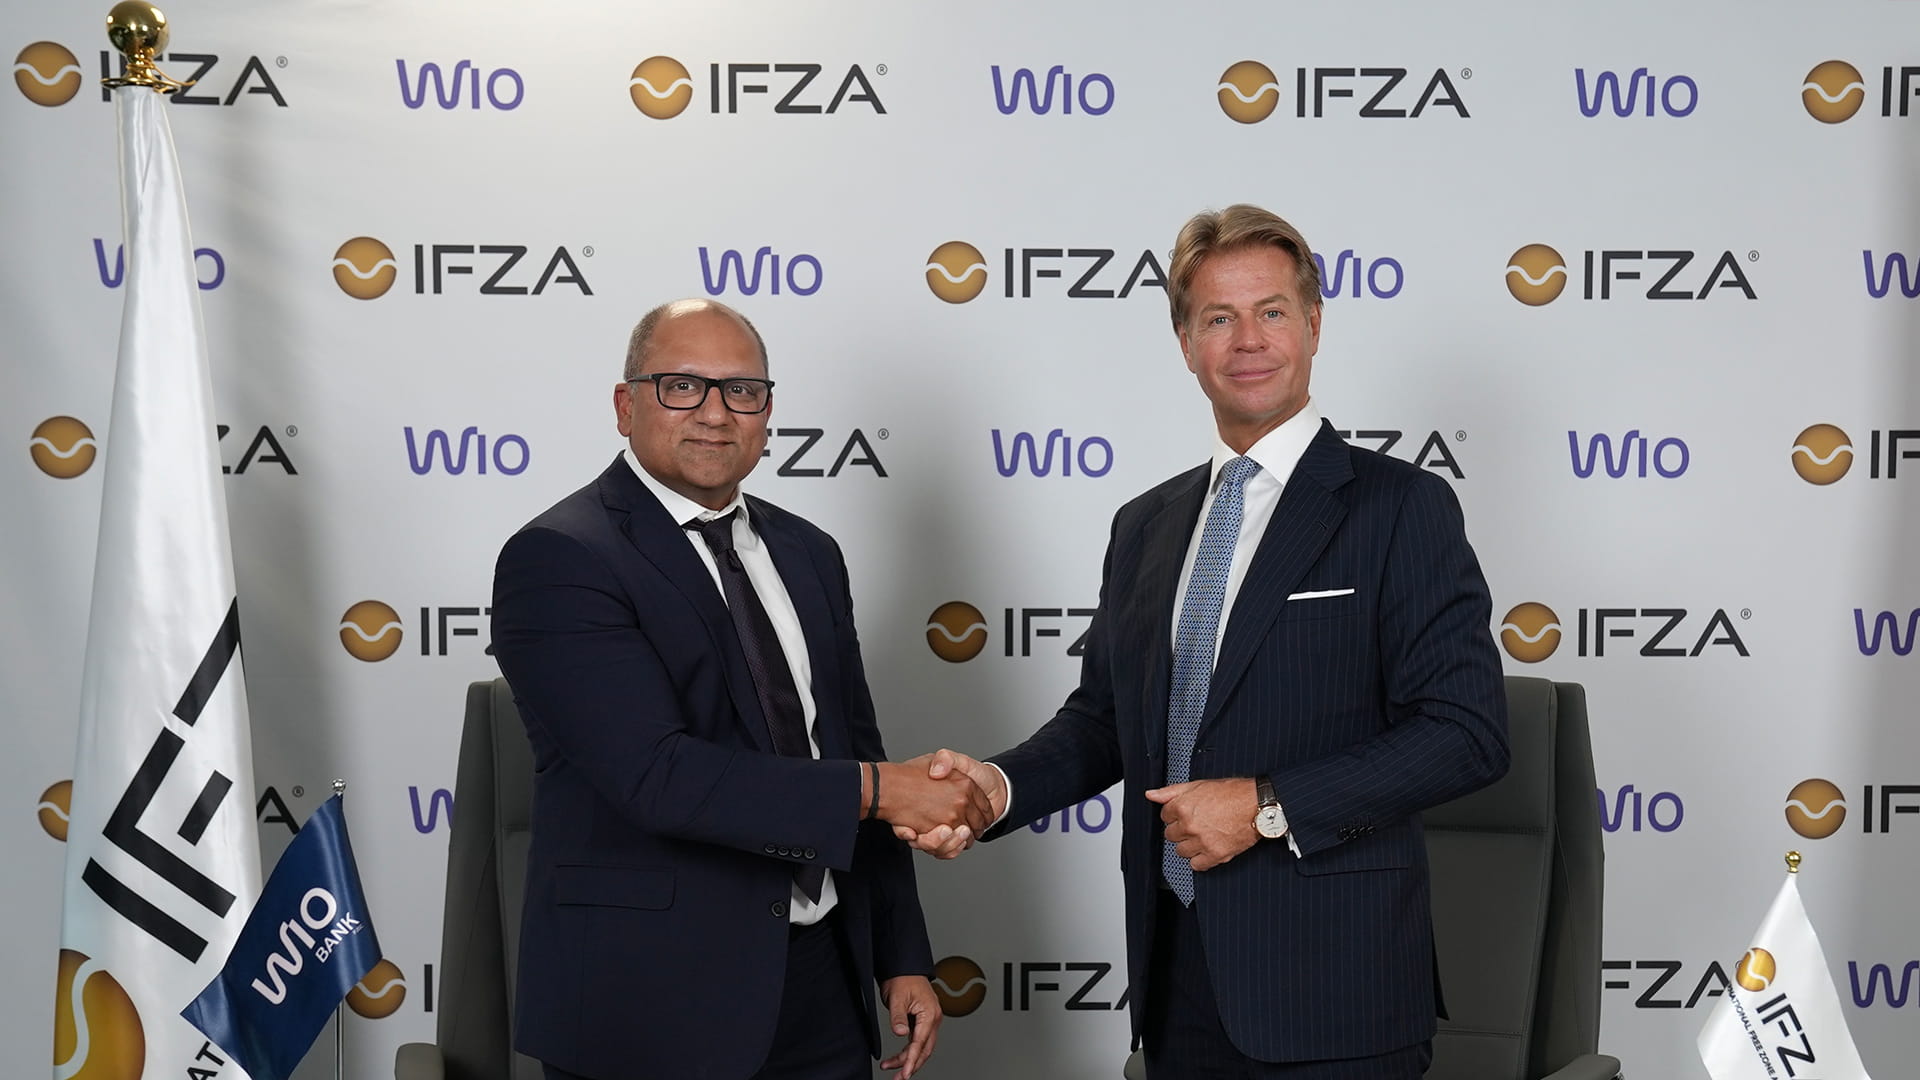 IFZA partners with wio bank to provide digital banking services